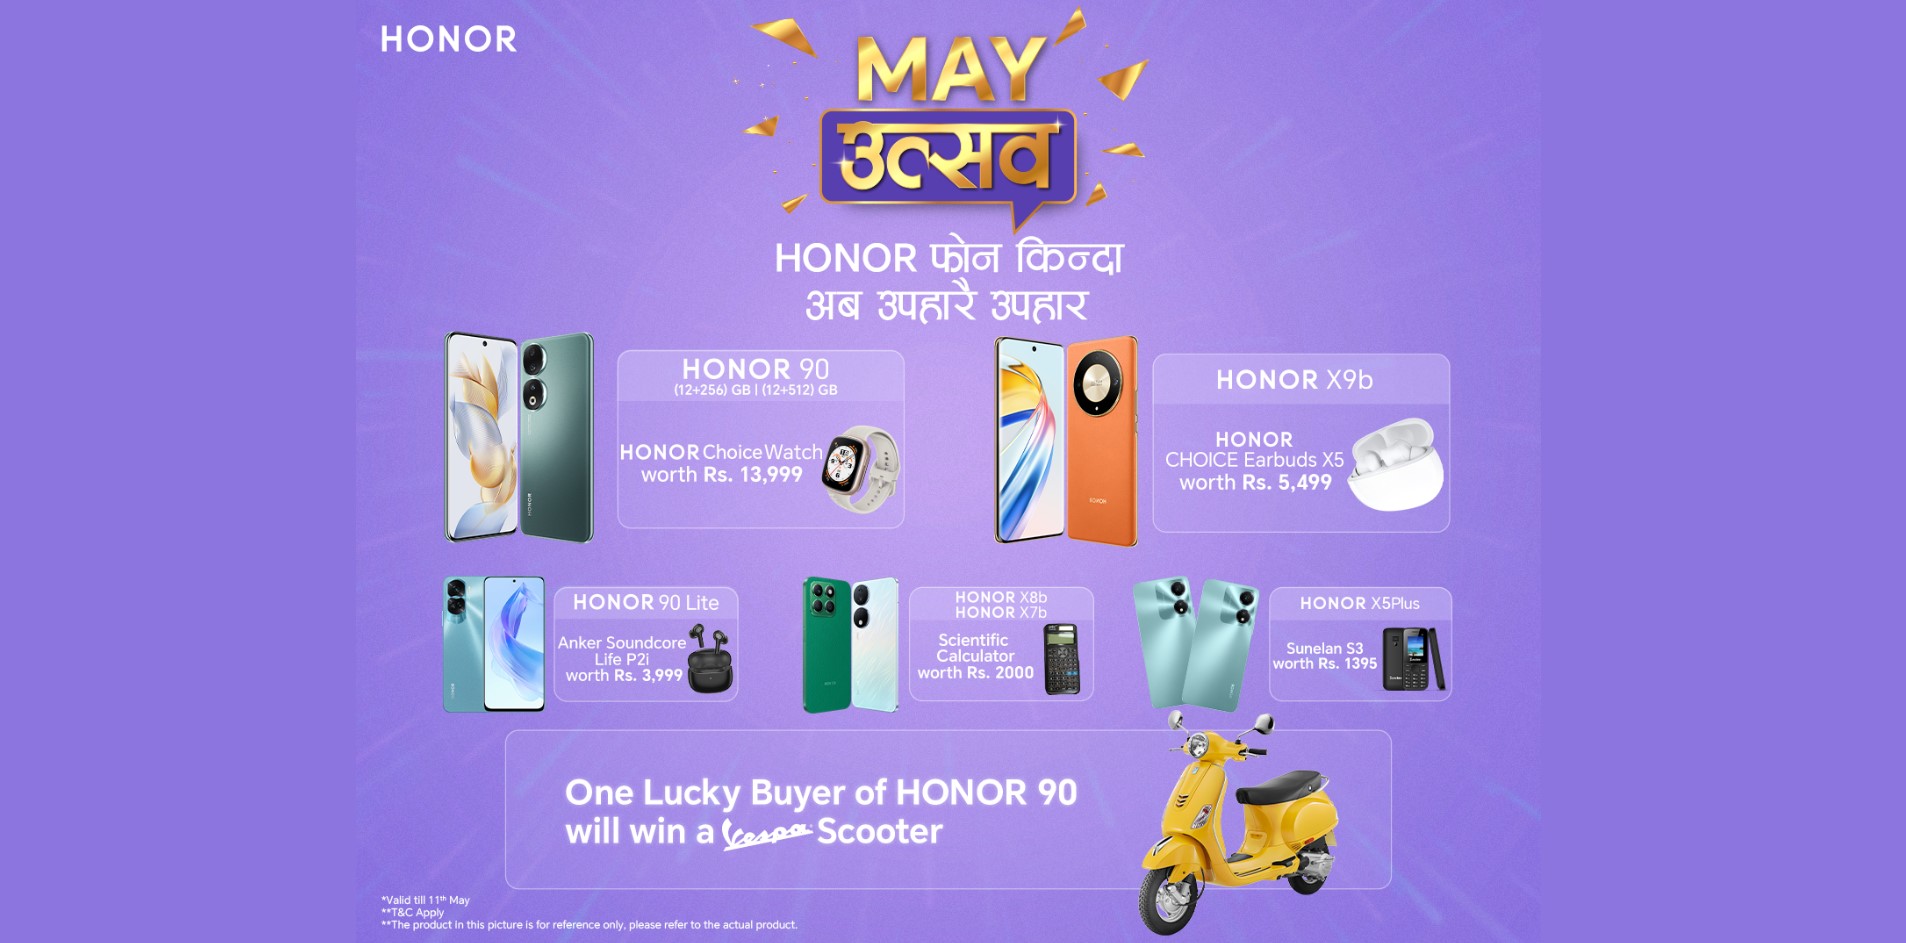 Buy an Honor Smartphone and Get Free Gifts Plus a Chance to Win a Vespa Scooter!